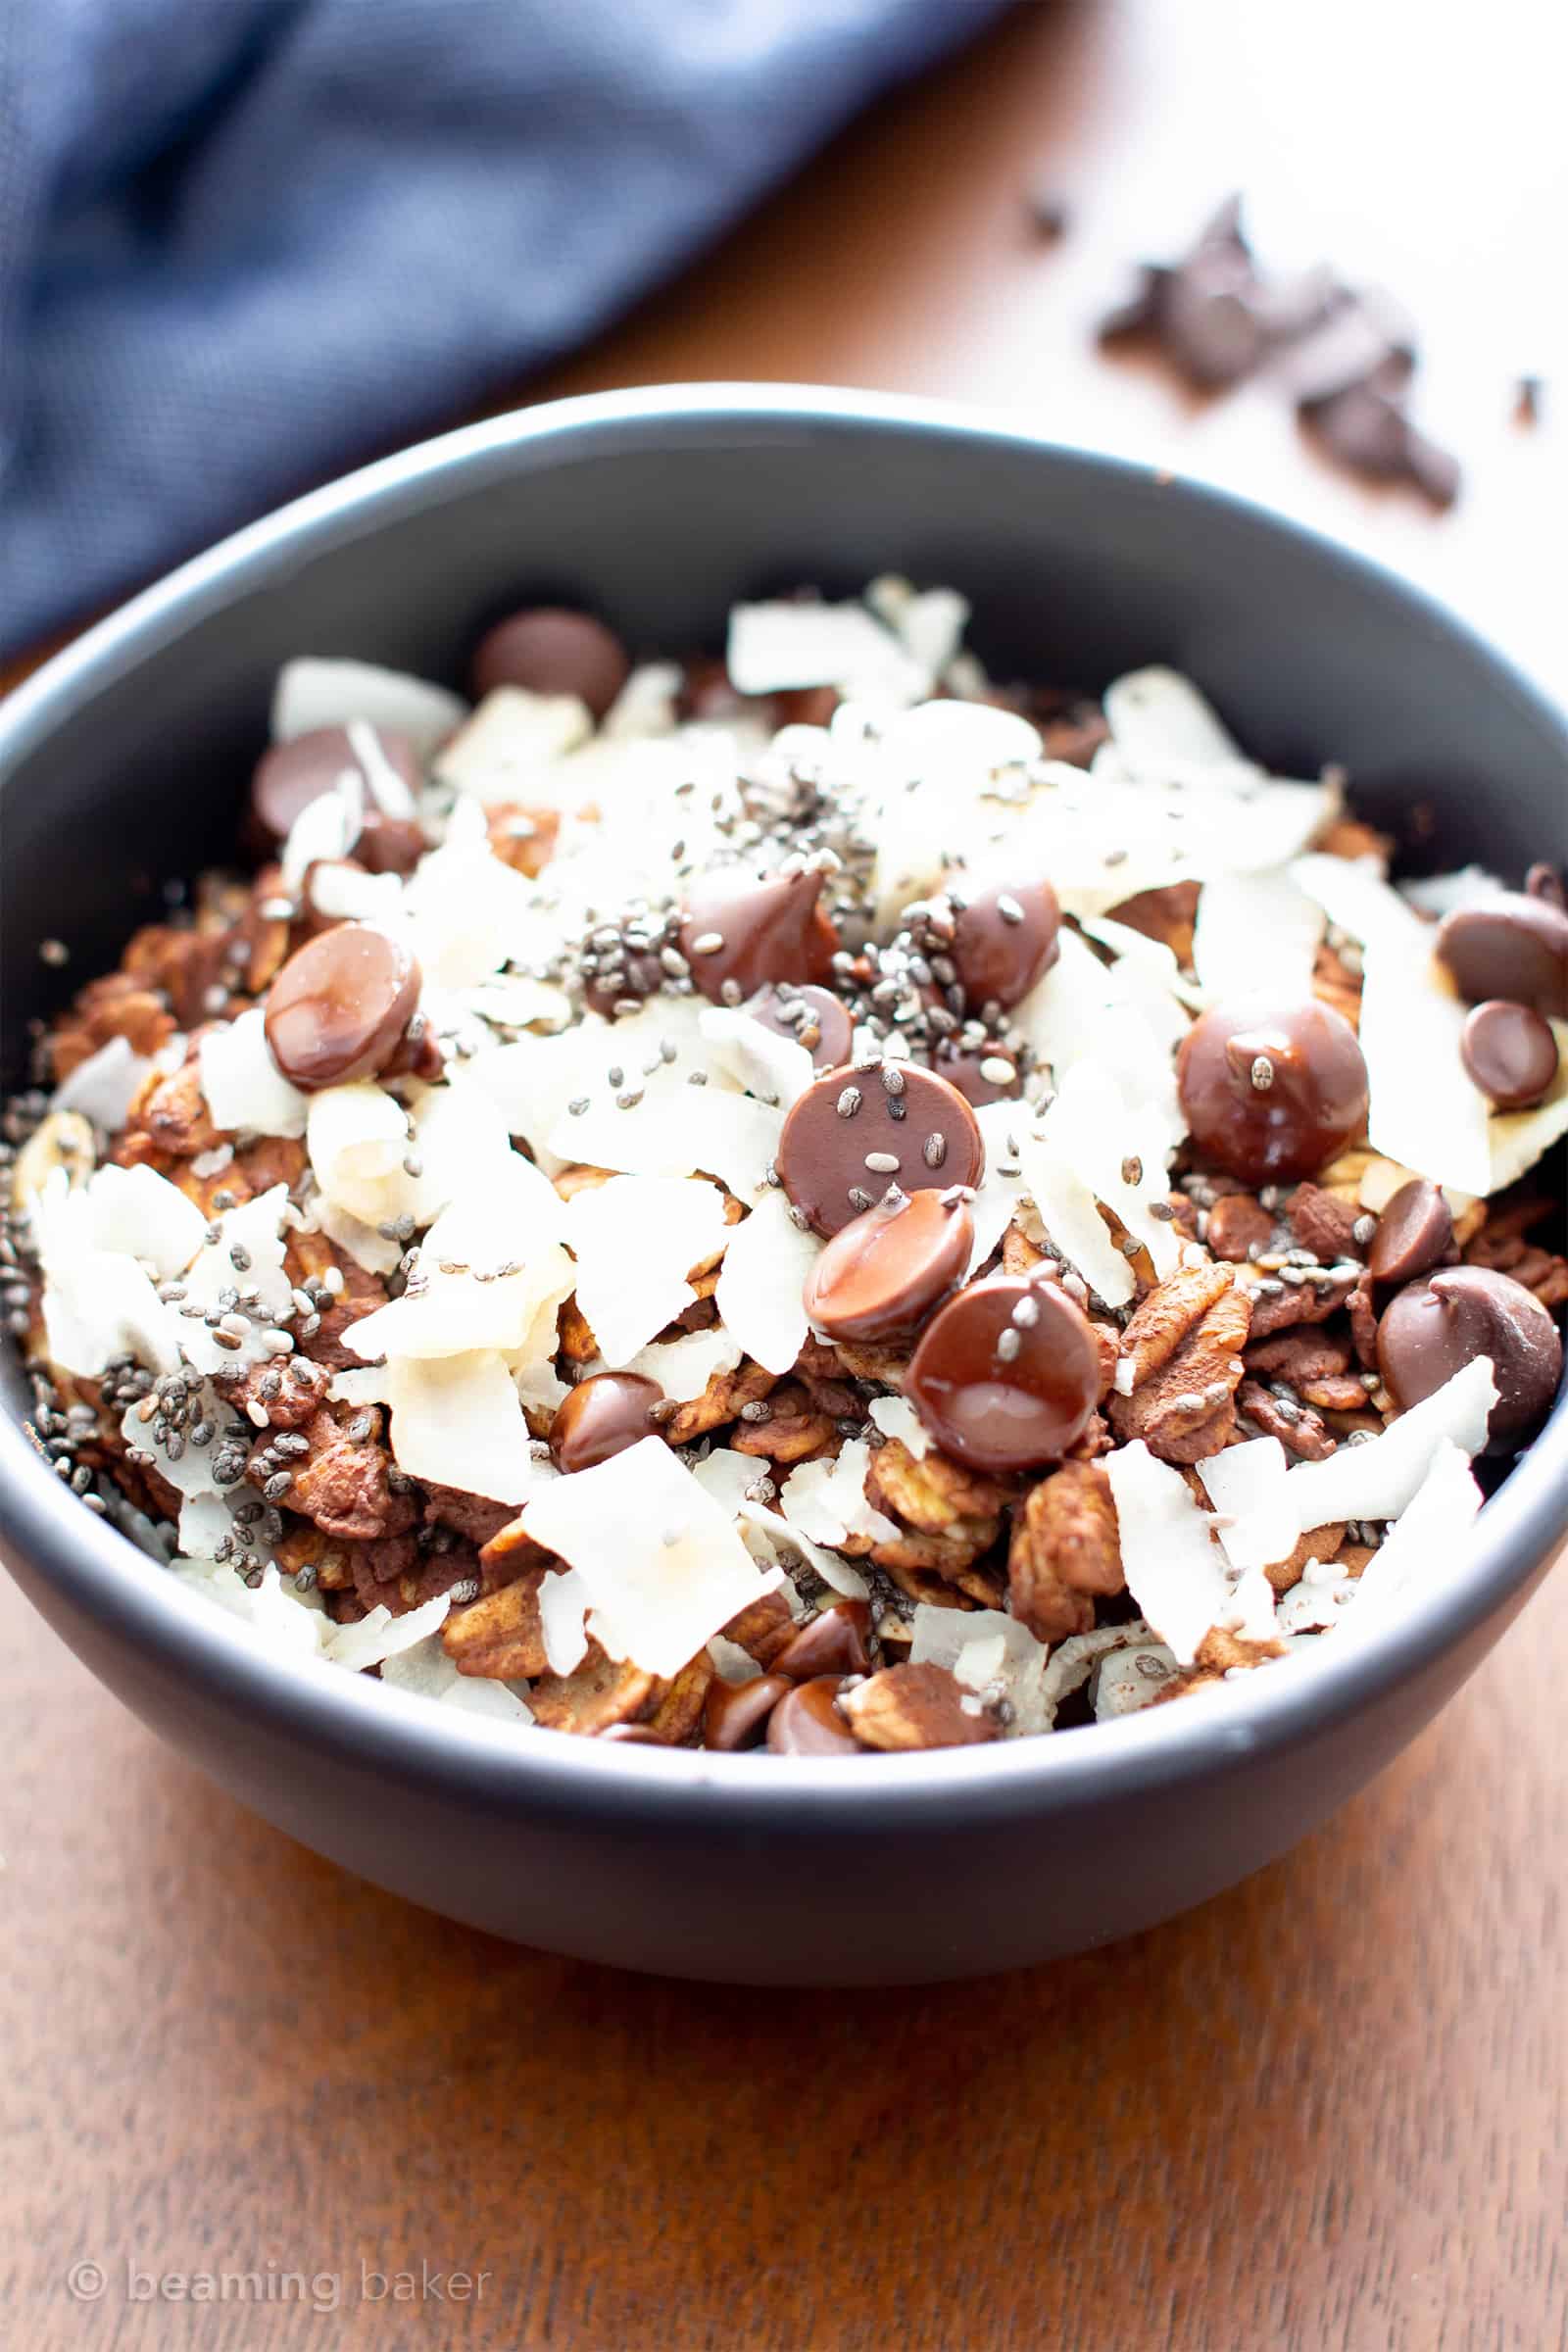 Midnight Mocha Bowls (V, GF): the perfect morning treat—a nourishing bowl of dark chocolate, coffee and superfood infused oatmeal to kick off a fantastic morning! #Vegan #GlutenFree #DairyFree #Breakfast | Recipe at BeamingBaker.com